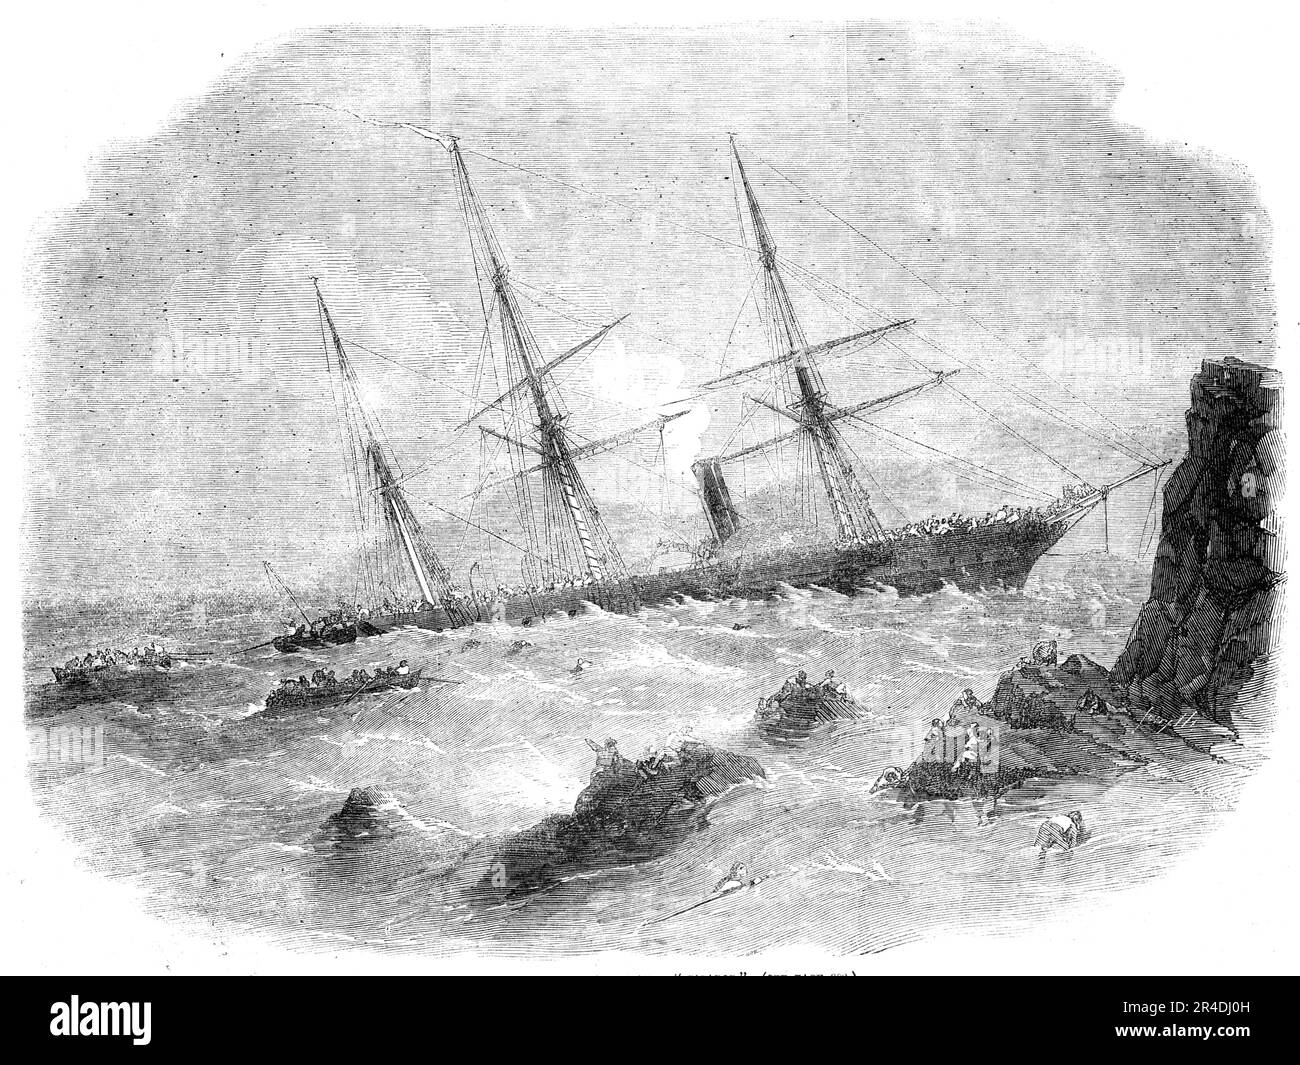 Wreck of the Chilian Steamer &quot;Cazador&quot;, 1856. Disaster off the coast of Chile. 'The vessel left Talcahuano with a smooth sea and south wind...having embarked the sixth company of the 2nd of the Line under Captain V. Rodriguez...twenty-three men under Second Lieutenant Alvarez de Araya, and a number of soldiers' wives, not less than 140...the First Lieutenant, Mr. Hubert Simpson, was startled by a sudden shock received by the vessel running on the Carranza Rocks...The Captain immediately gave orders to draw near the shore and land the passengers, but in vain. The hull had been opened Stock Photo